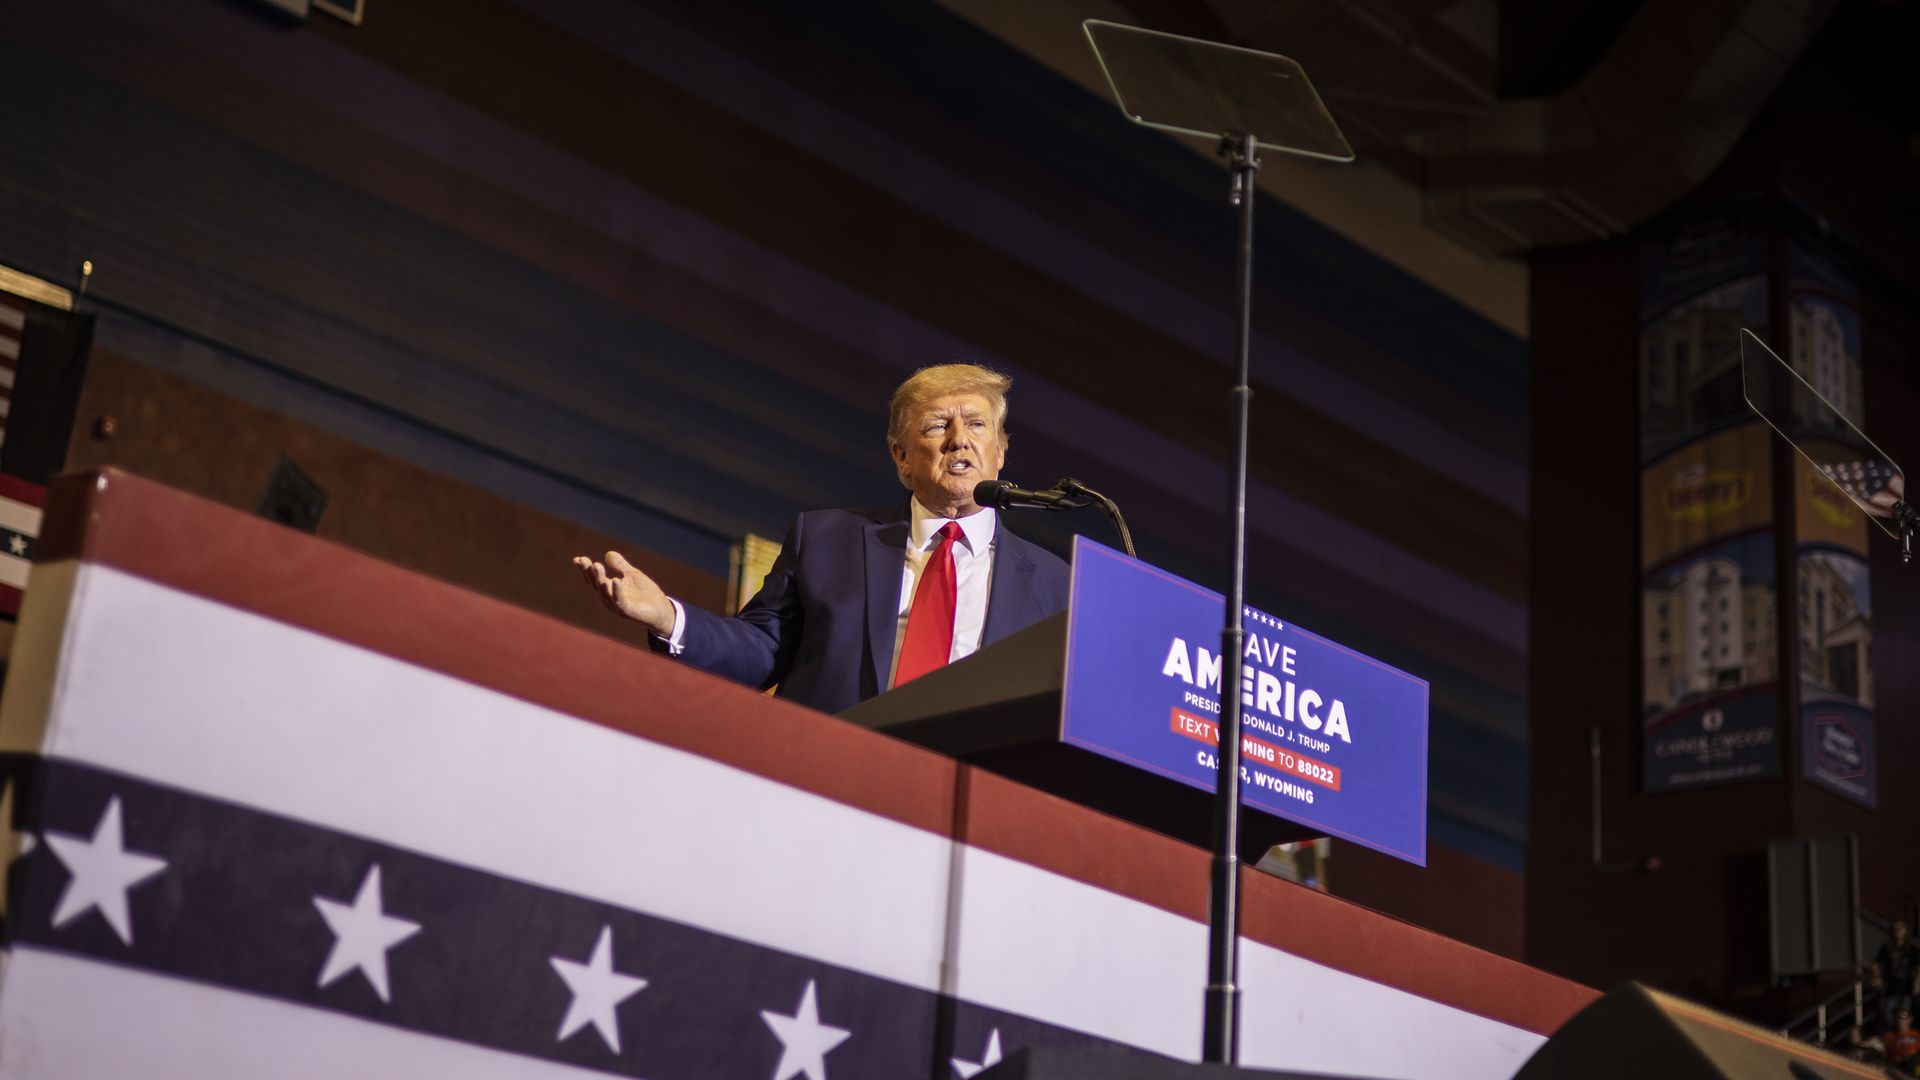 Photo of Donald Trump speaking from a podium while gesturing with his right hand